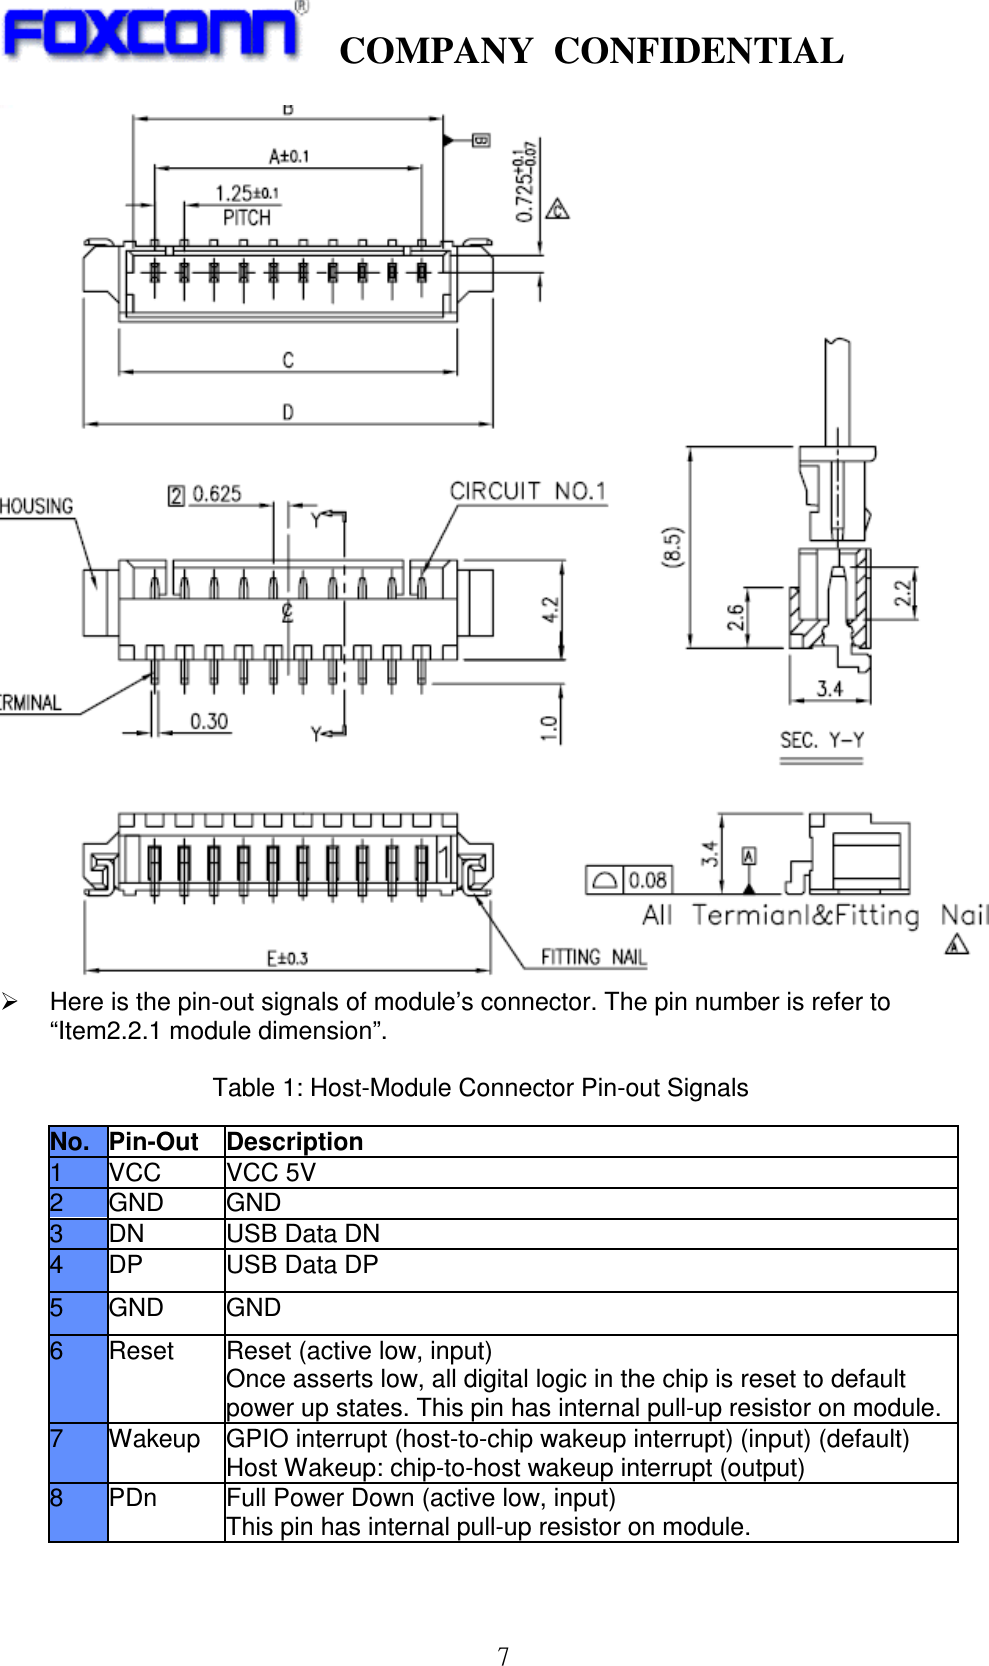    COMPANY  CONFIDENTIAL             7    Here is the pin-out signals of module’s connector. The pin number is refer to “Item2.2.1 module dimension”.  Table 1: Host-Module Connector Pin-out Signals No. Pin-Out  Description 1 VCC VCC 5V 2  GND  GND 3  DN  USB Data DN 4  DP  USB Data DP 5  GND  GND 6  Reset  Reset (active low, input) Once asserts low, all digital logic in the chip is reset to default power up states. This pin has internal pull-up resistor on module. 7  Wakeup  GPIO interrupt (host-to-chip wakeup interrupt) (input) (default) Host Wakeup: chip-to-host wakeup interrupt (output) 8  PDn  Full Power Down (active low, input) This pin has internal pull-up resistor on module.  